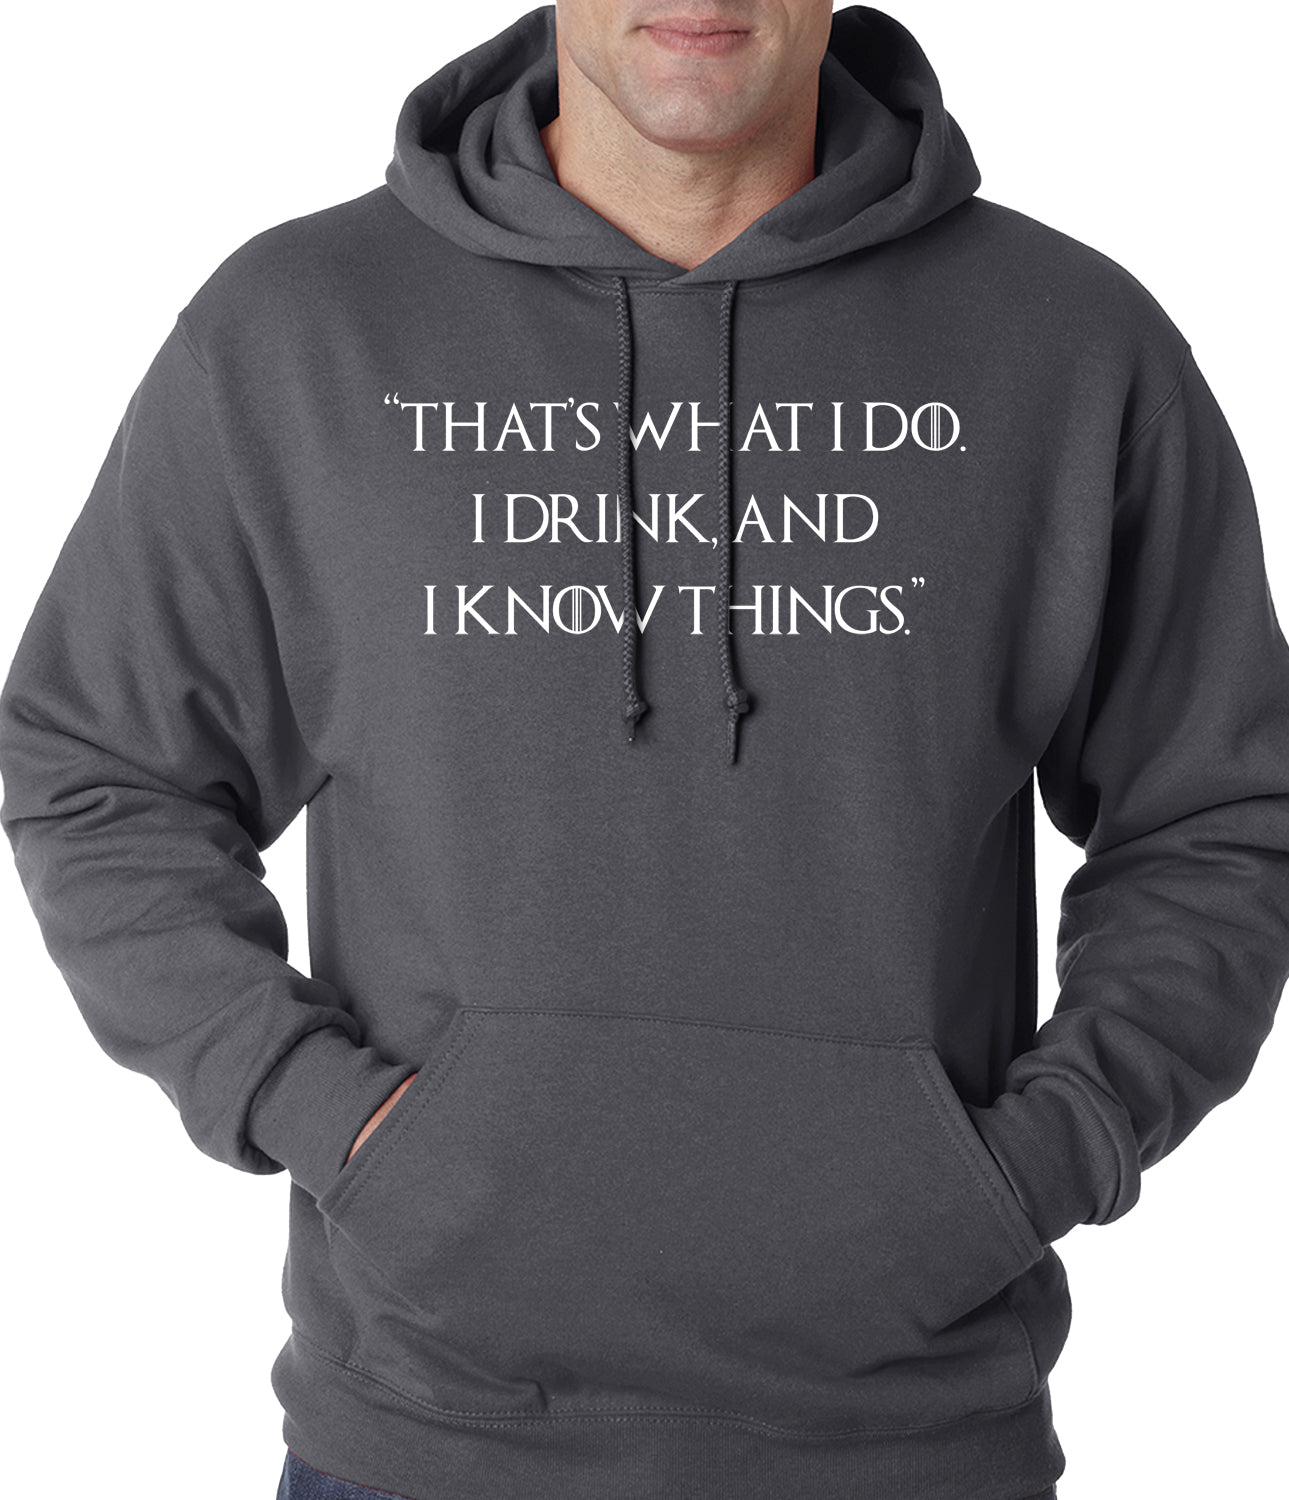 Thats What I Do. I Drink and I Know Things Adult Hoodie